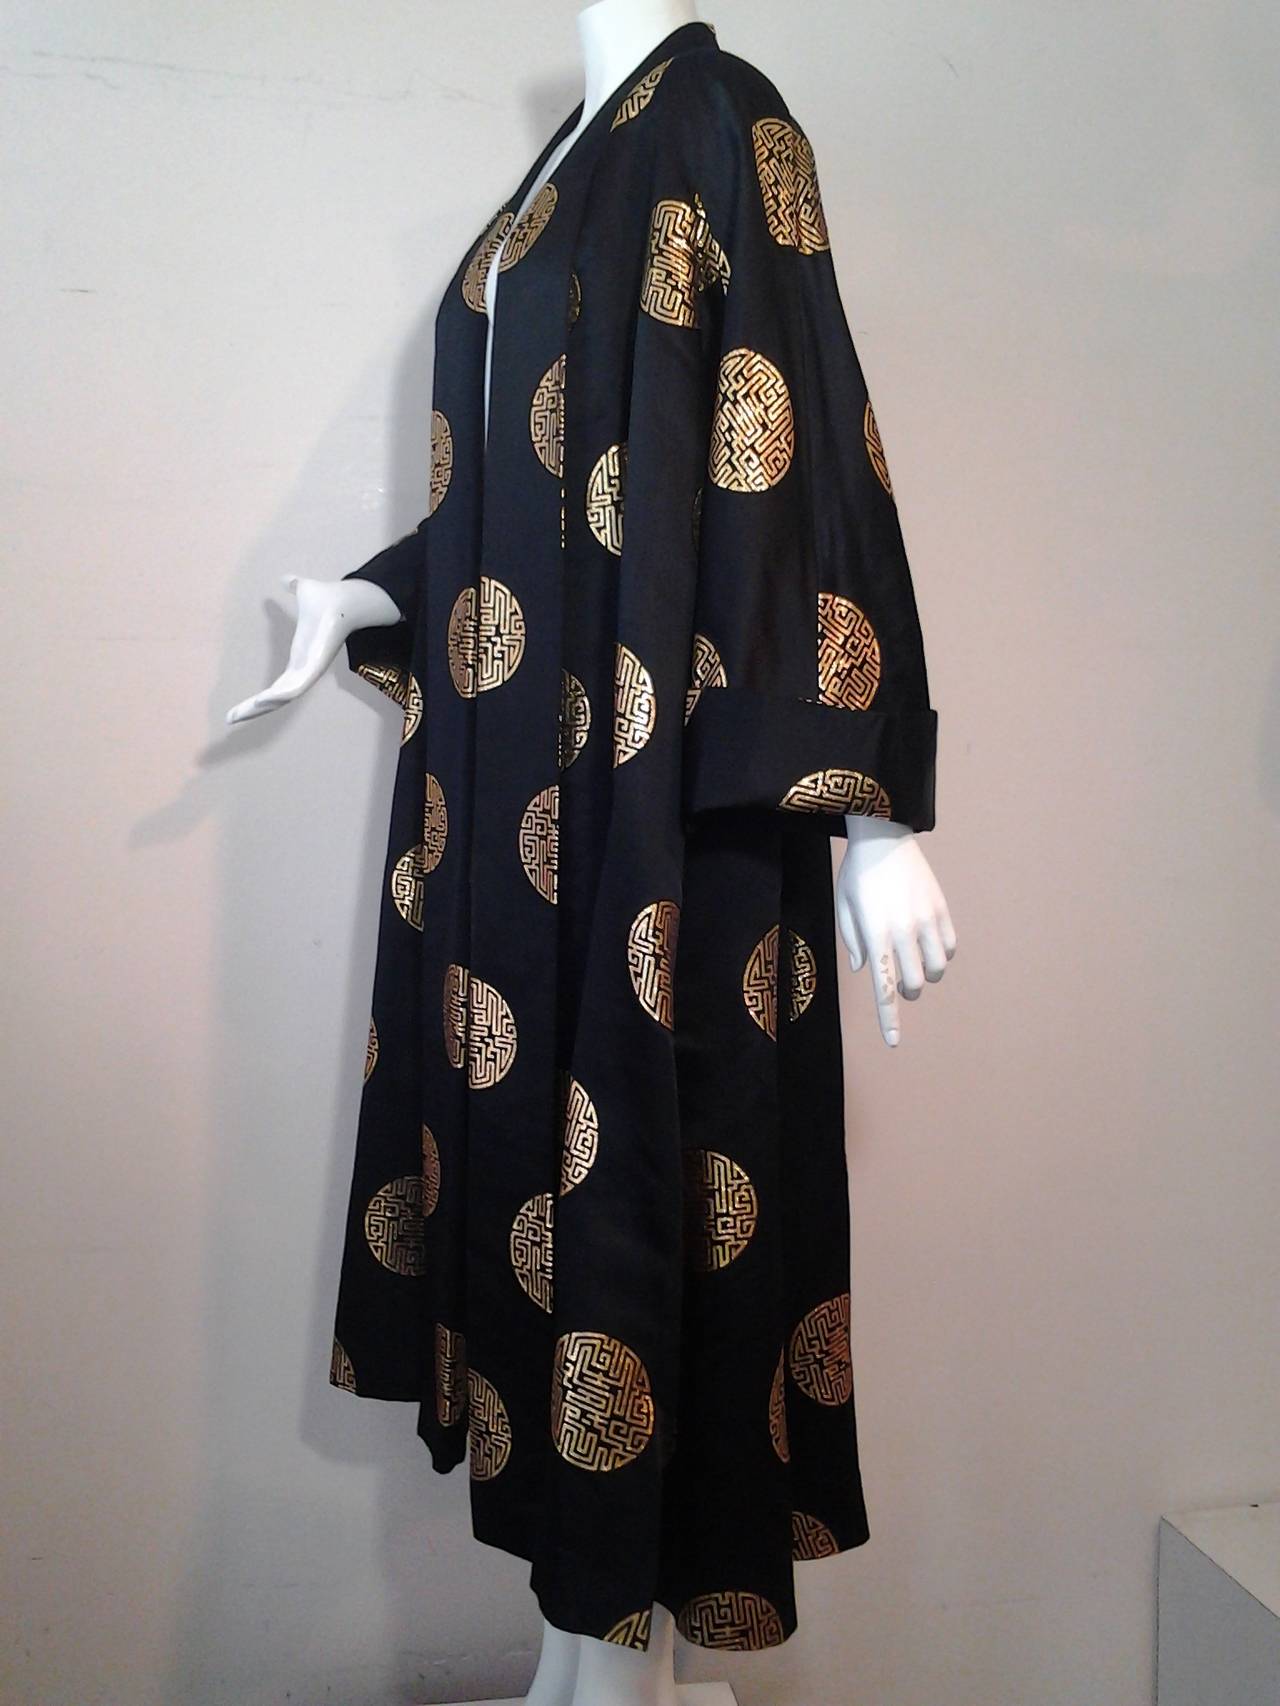 A gorgeous and dramatic 1950s Hong Kong silk satin opera coat cut in a full swing style, with large gold brocade medallions over entire coat. Lined in silk with deep cuffs.